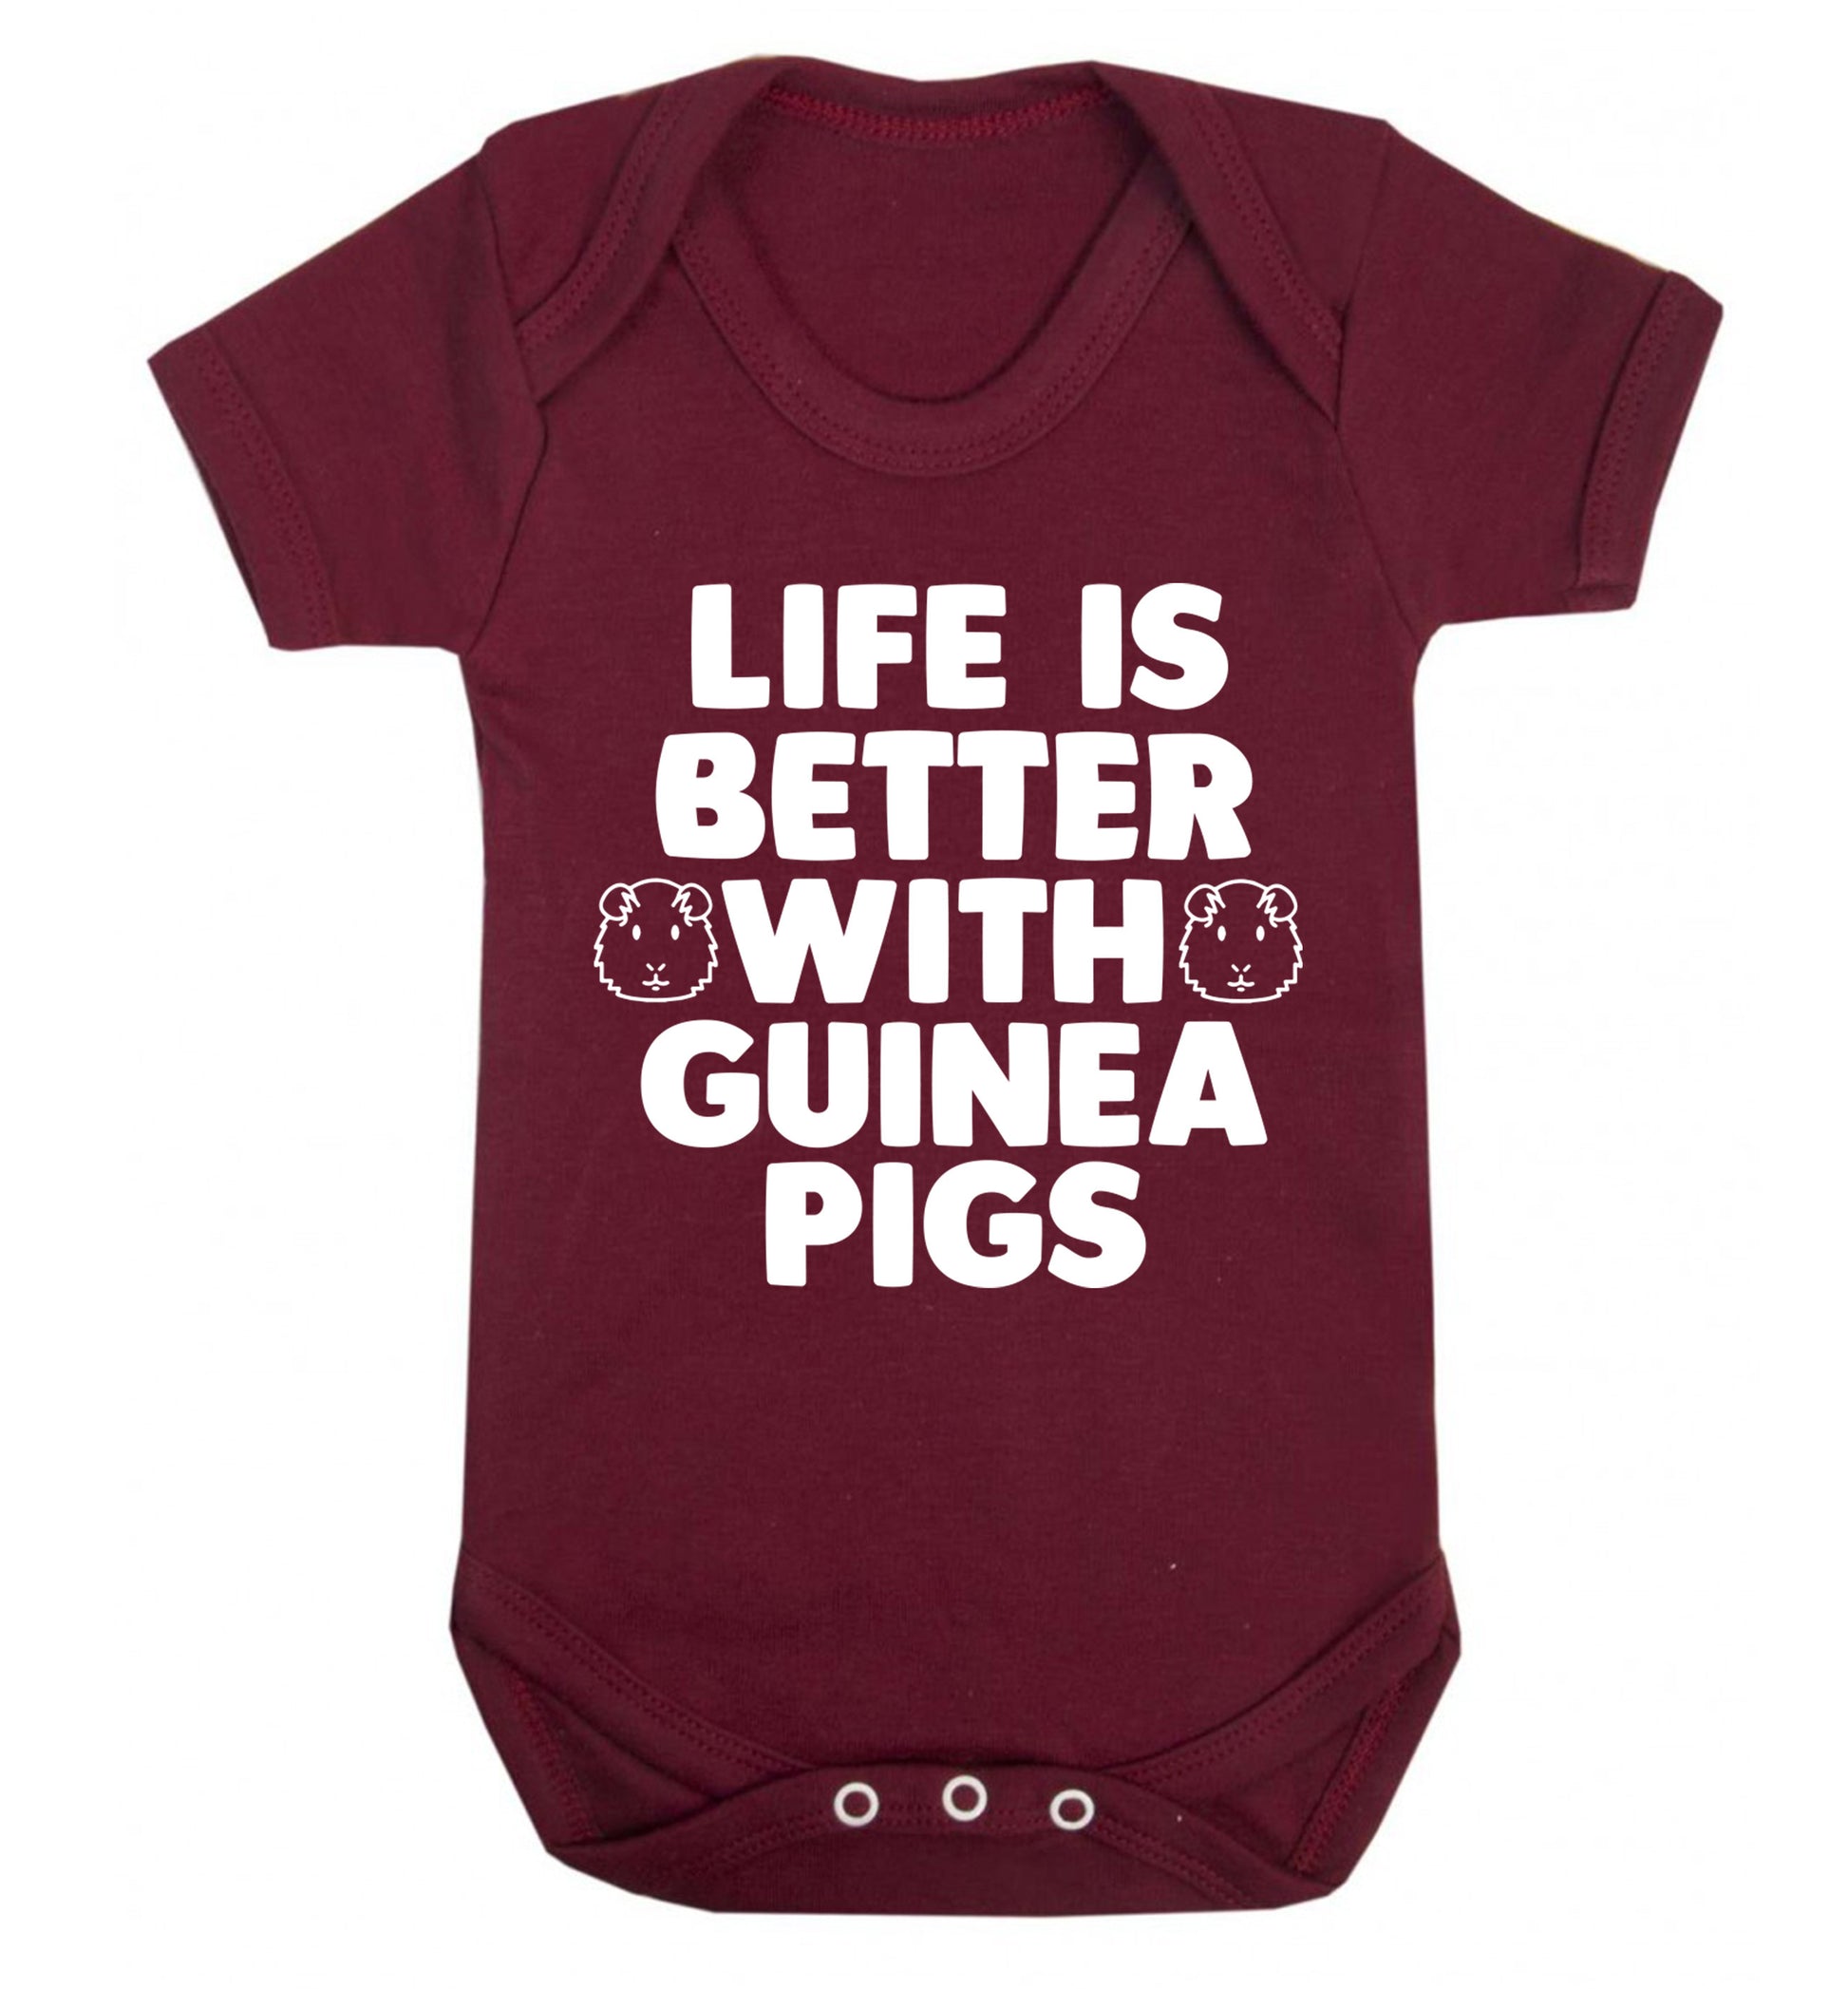 Life is better with guinea pigs Baby Vest maroon 18-24 months